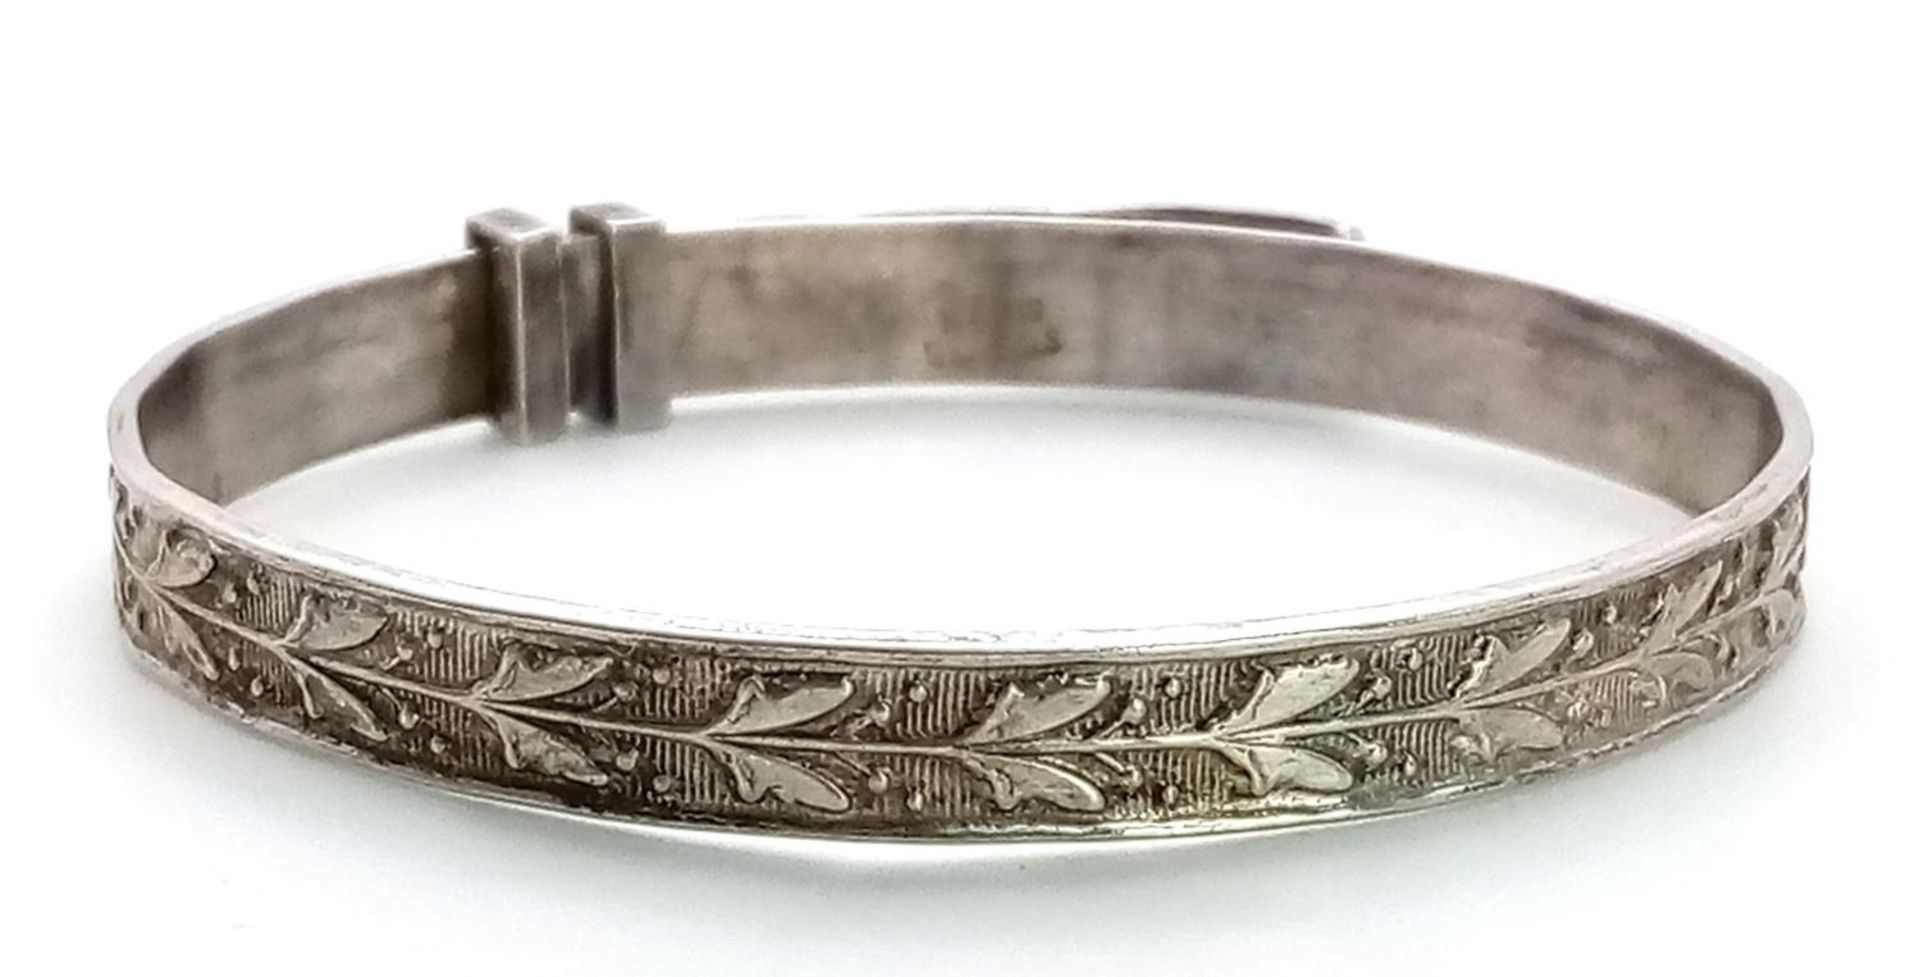 A Silver Victorian Child's Bangle. 4.2cm diameter, 6.14g weight. - Image 4 of 6